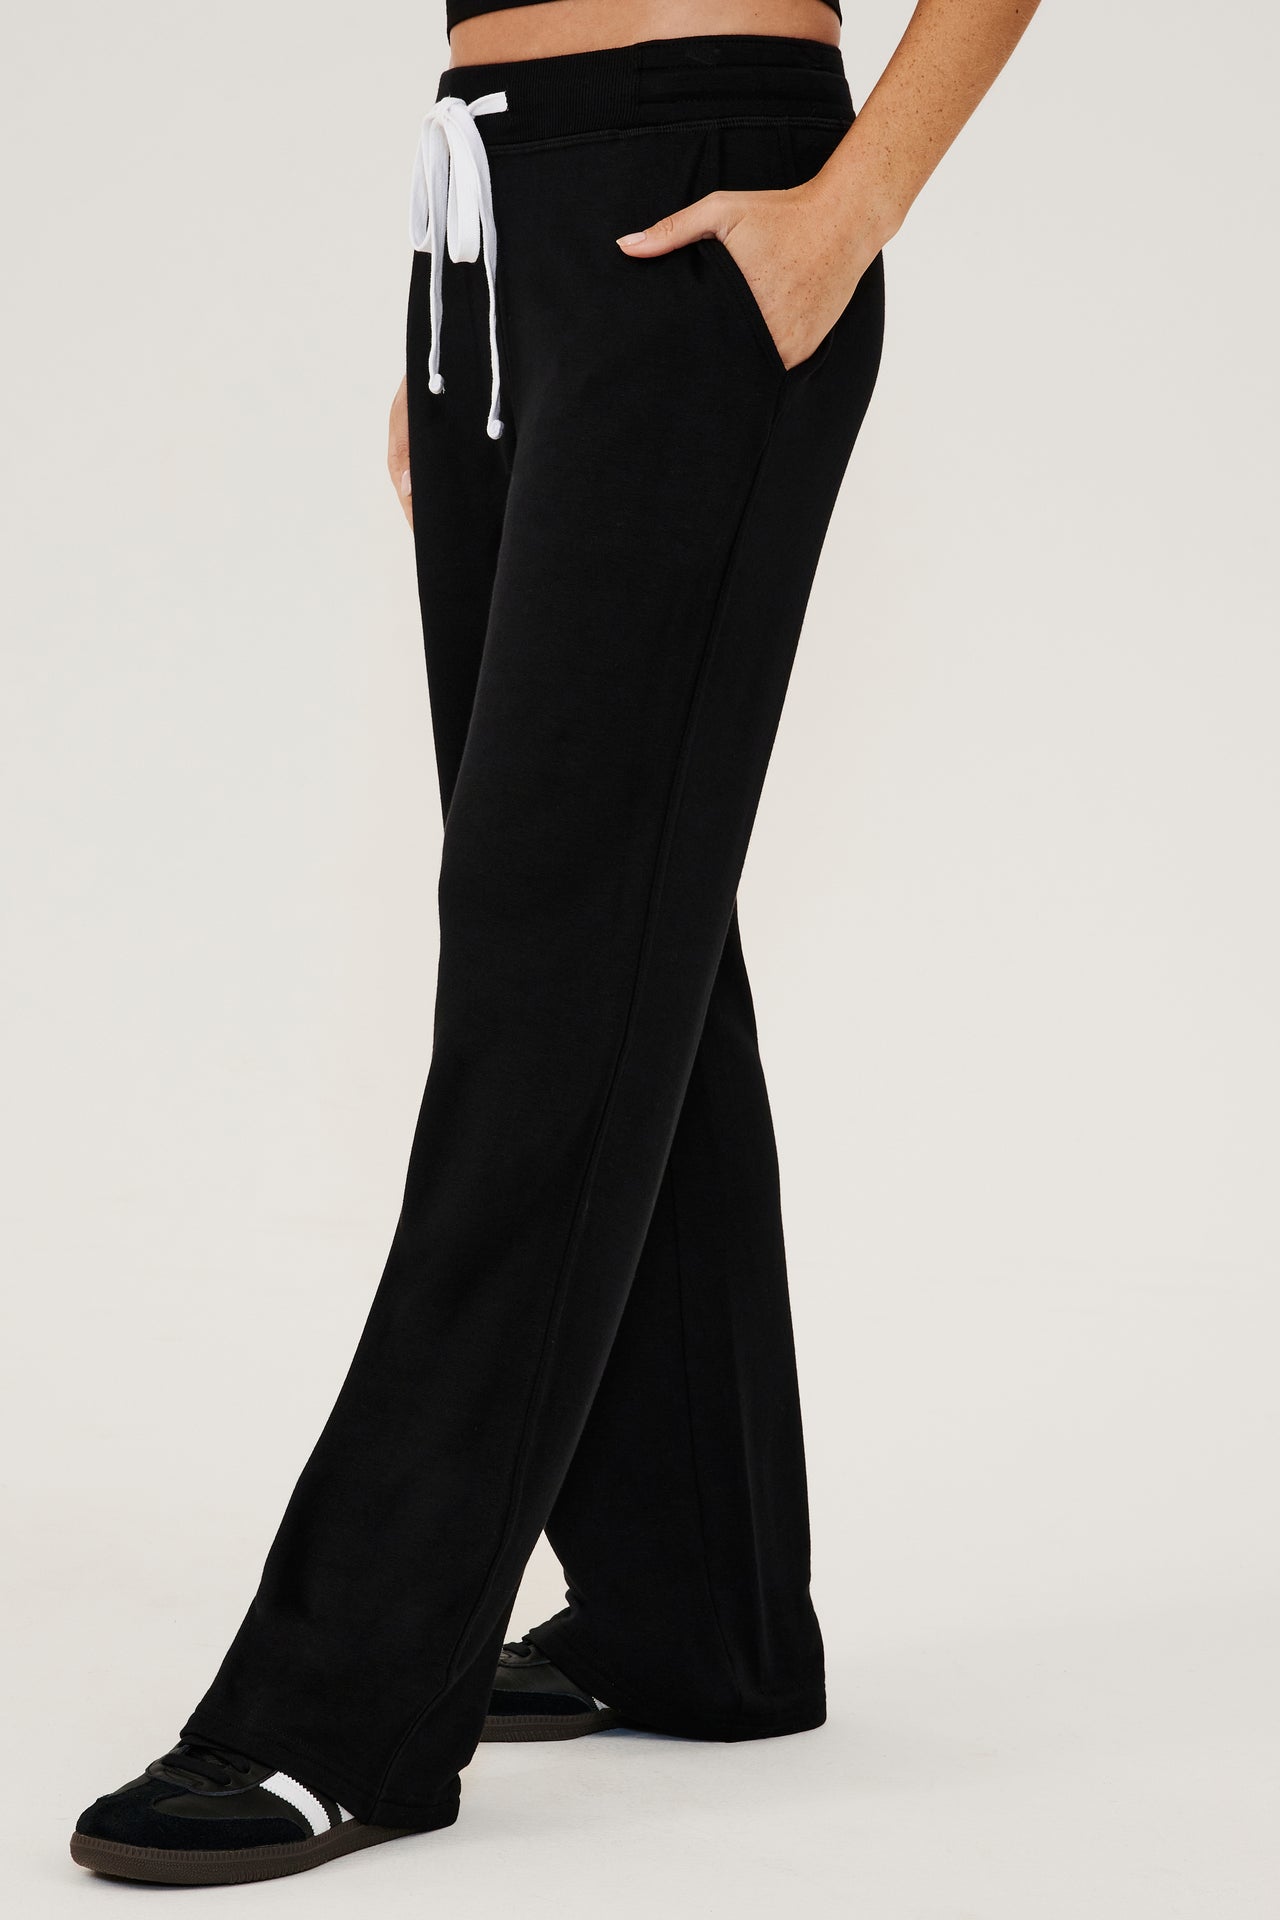 Front side view of woman wearing a black high rise wide leg relaxed fit sweatpant with side pockets and white drawstring. Paired with black shoes with white stripes.